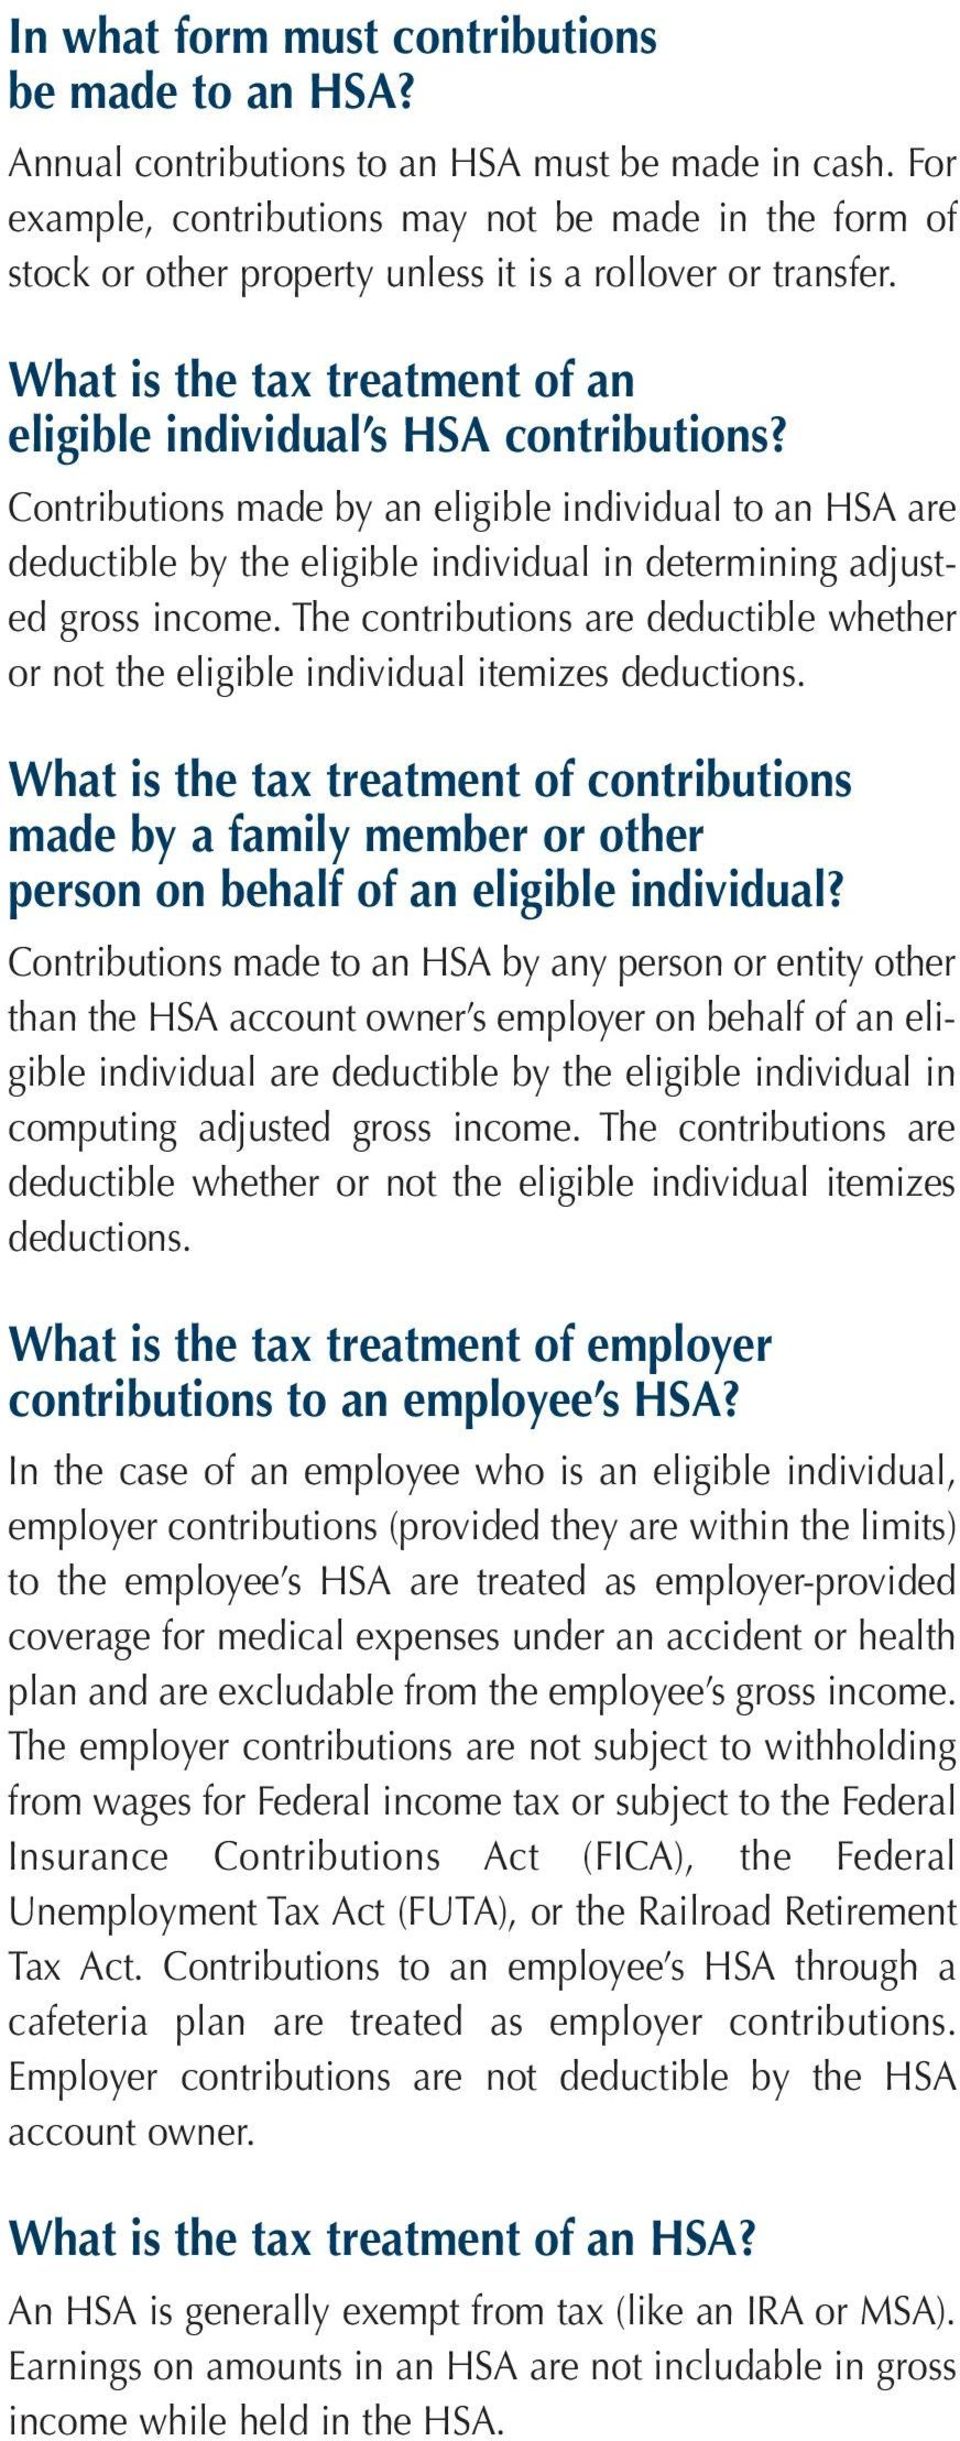 Contributions made by an eligible individual to an HSA are deductible by the eligible individual in determining adjusted gross income.